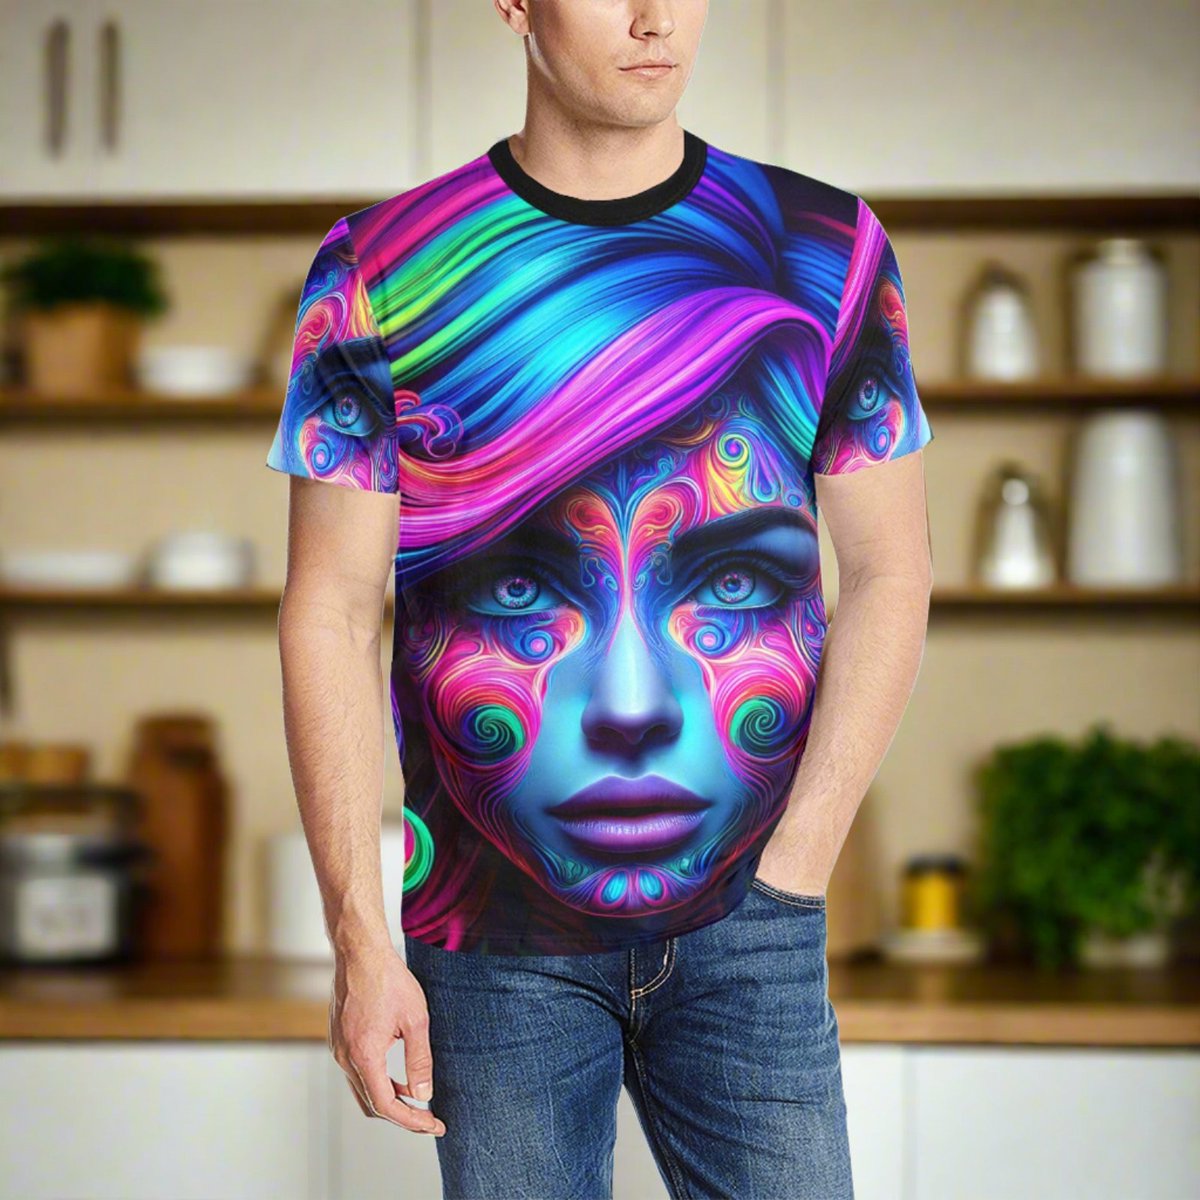 Turn heads and captivate minds with our Psychedelic Woman T-shirt! 🌟👕 A true masterpiece of wearable art, perfect for anyone who loves bold, vibrant designs. #FashionArt #PsychedelicWear
shhcreations.com/products/psych…